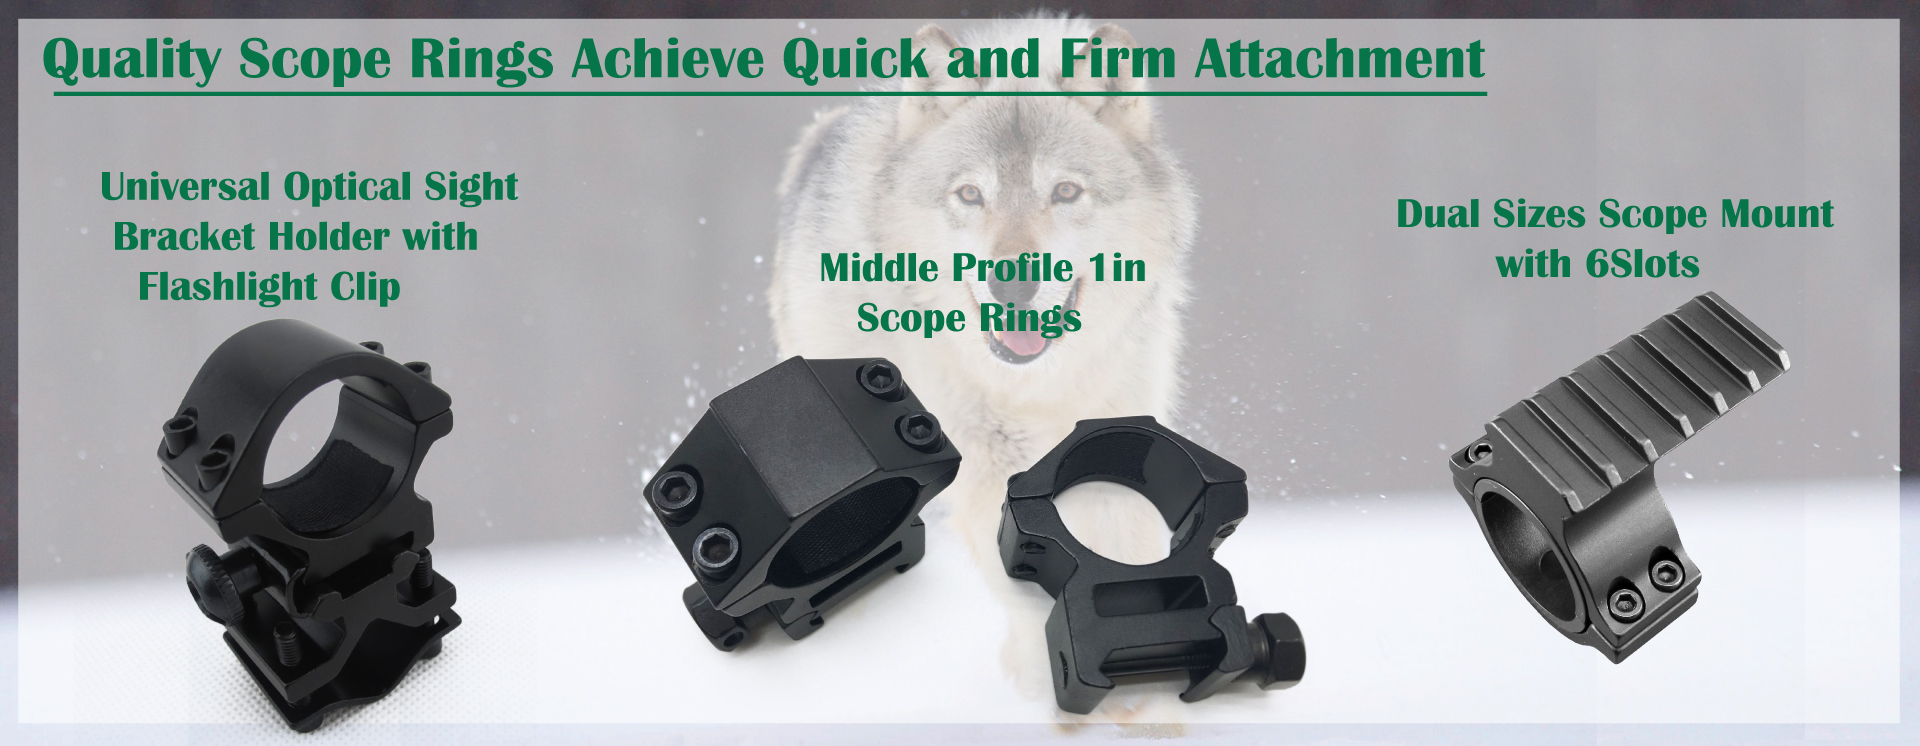 Quality Scope Rings